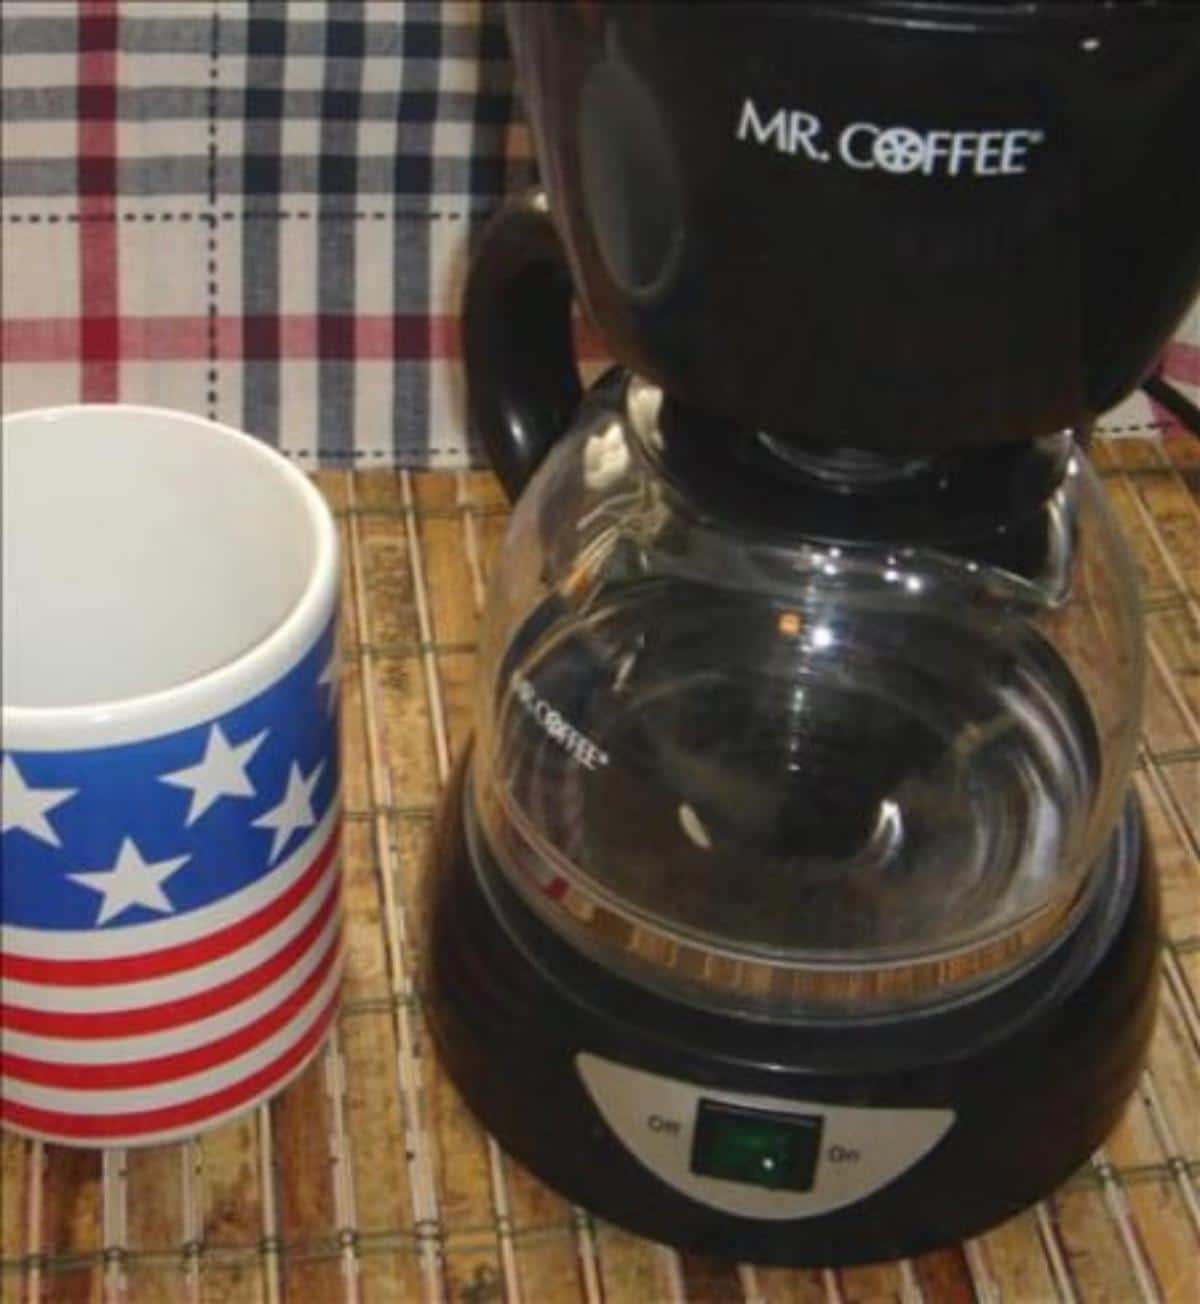 Automatic coffee maker with a cup.